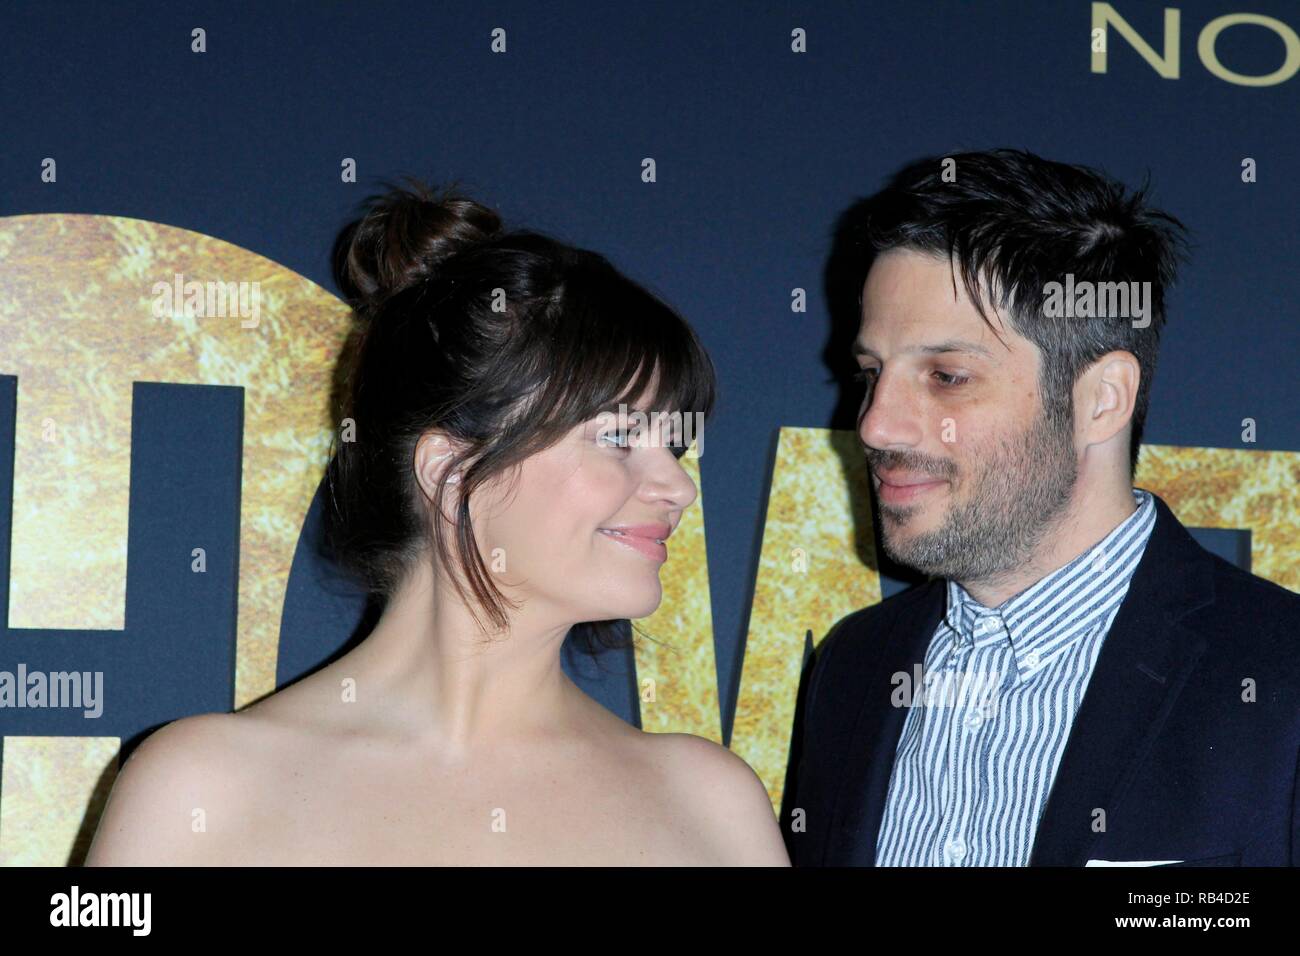 Los Angeles, CA, USA. 5th Jan, 2019. Casey Wilson, David Caspe at arrivals for SHOWTIME Golden Globe Nominees Celebration, Sunset Tower Hotel, Los Angeles, CA January 5, 2019. Credit: Priscilla Grant/Everett Collection/Alamy Live News Stock Photo